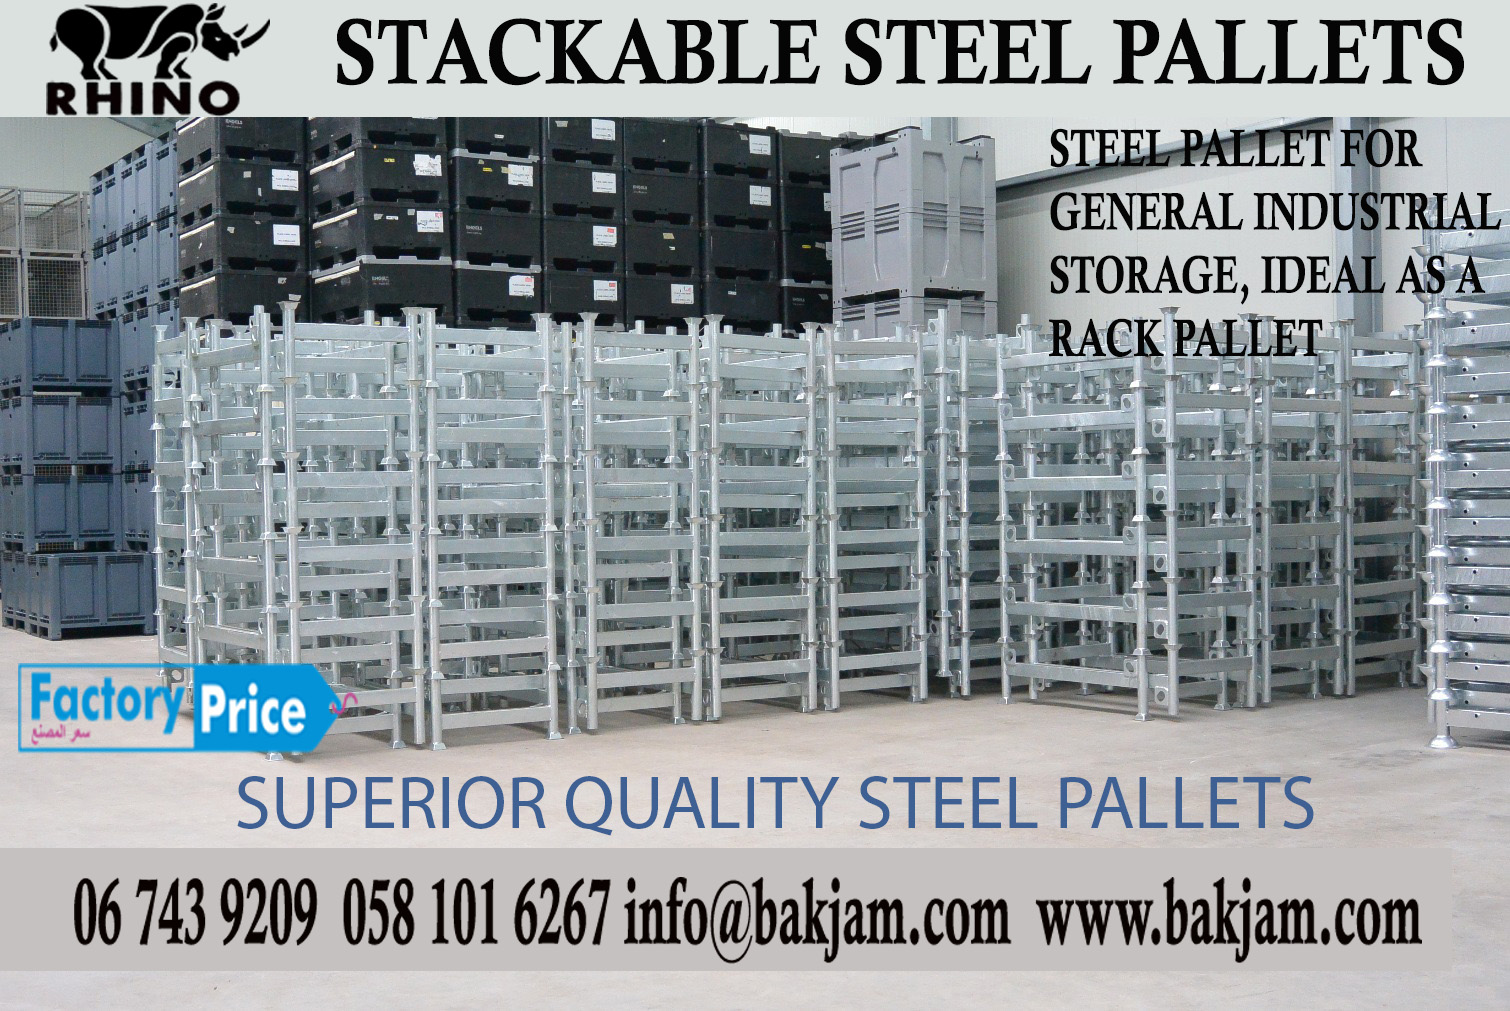 STEEL PALLETS FLAT AND STACKING PALLETS